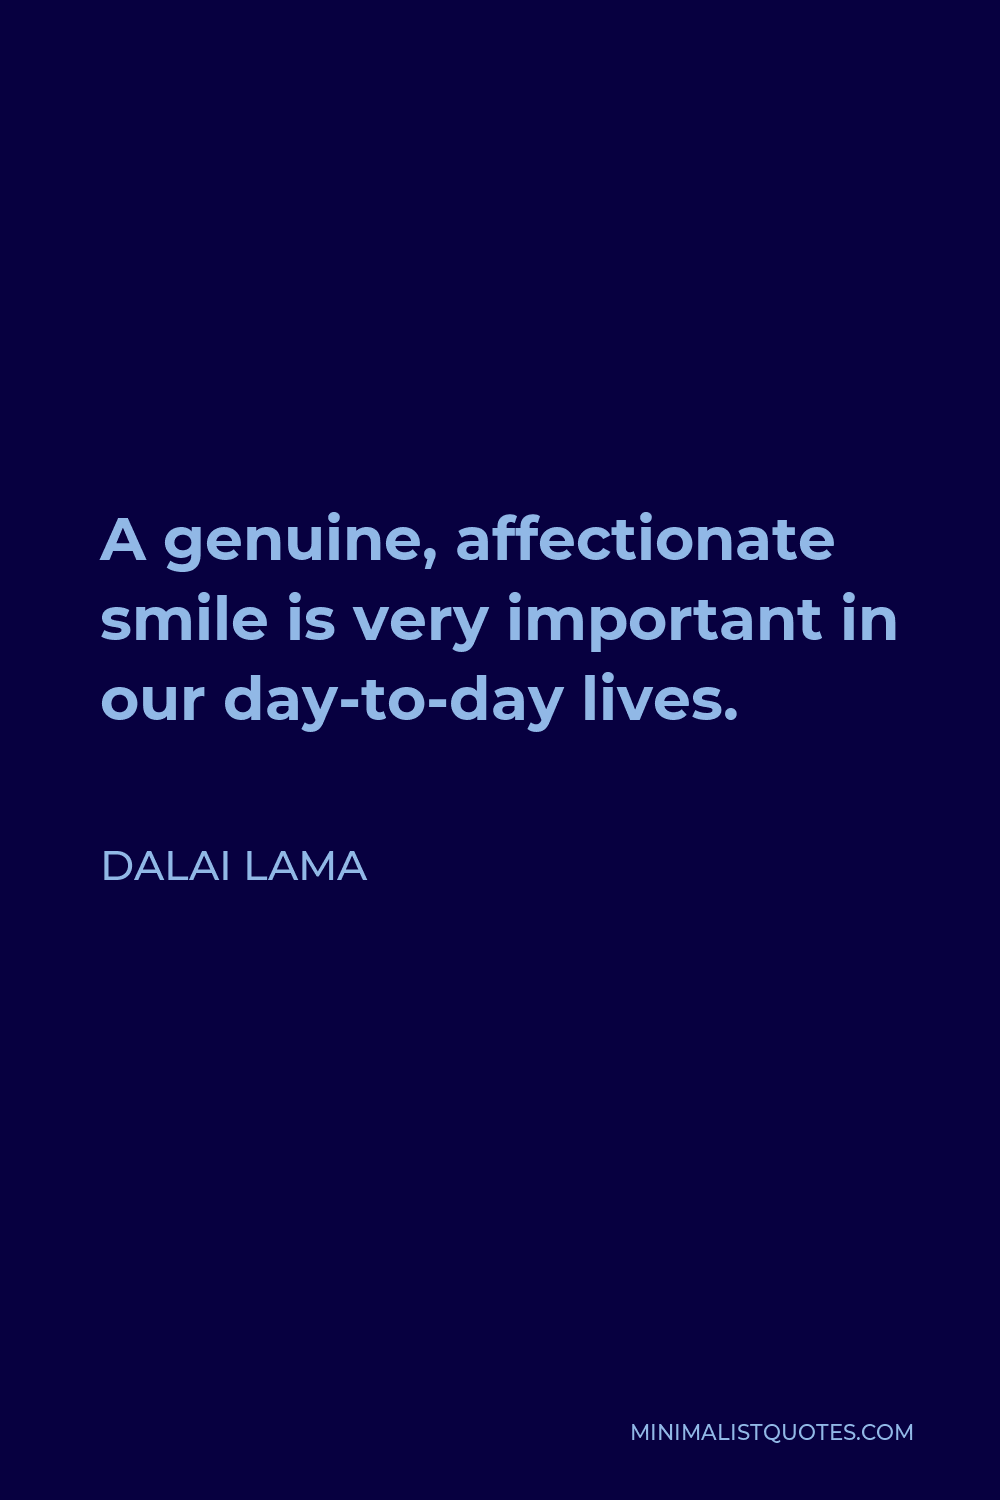 Dalai Lama Quote - A genuine, affectionate smile is very important in our day-to-day lives.